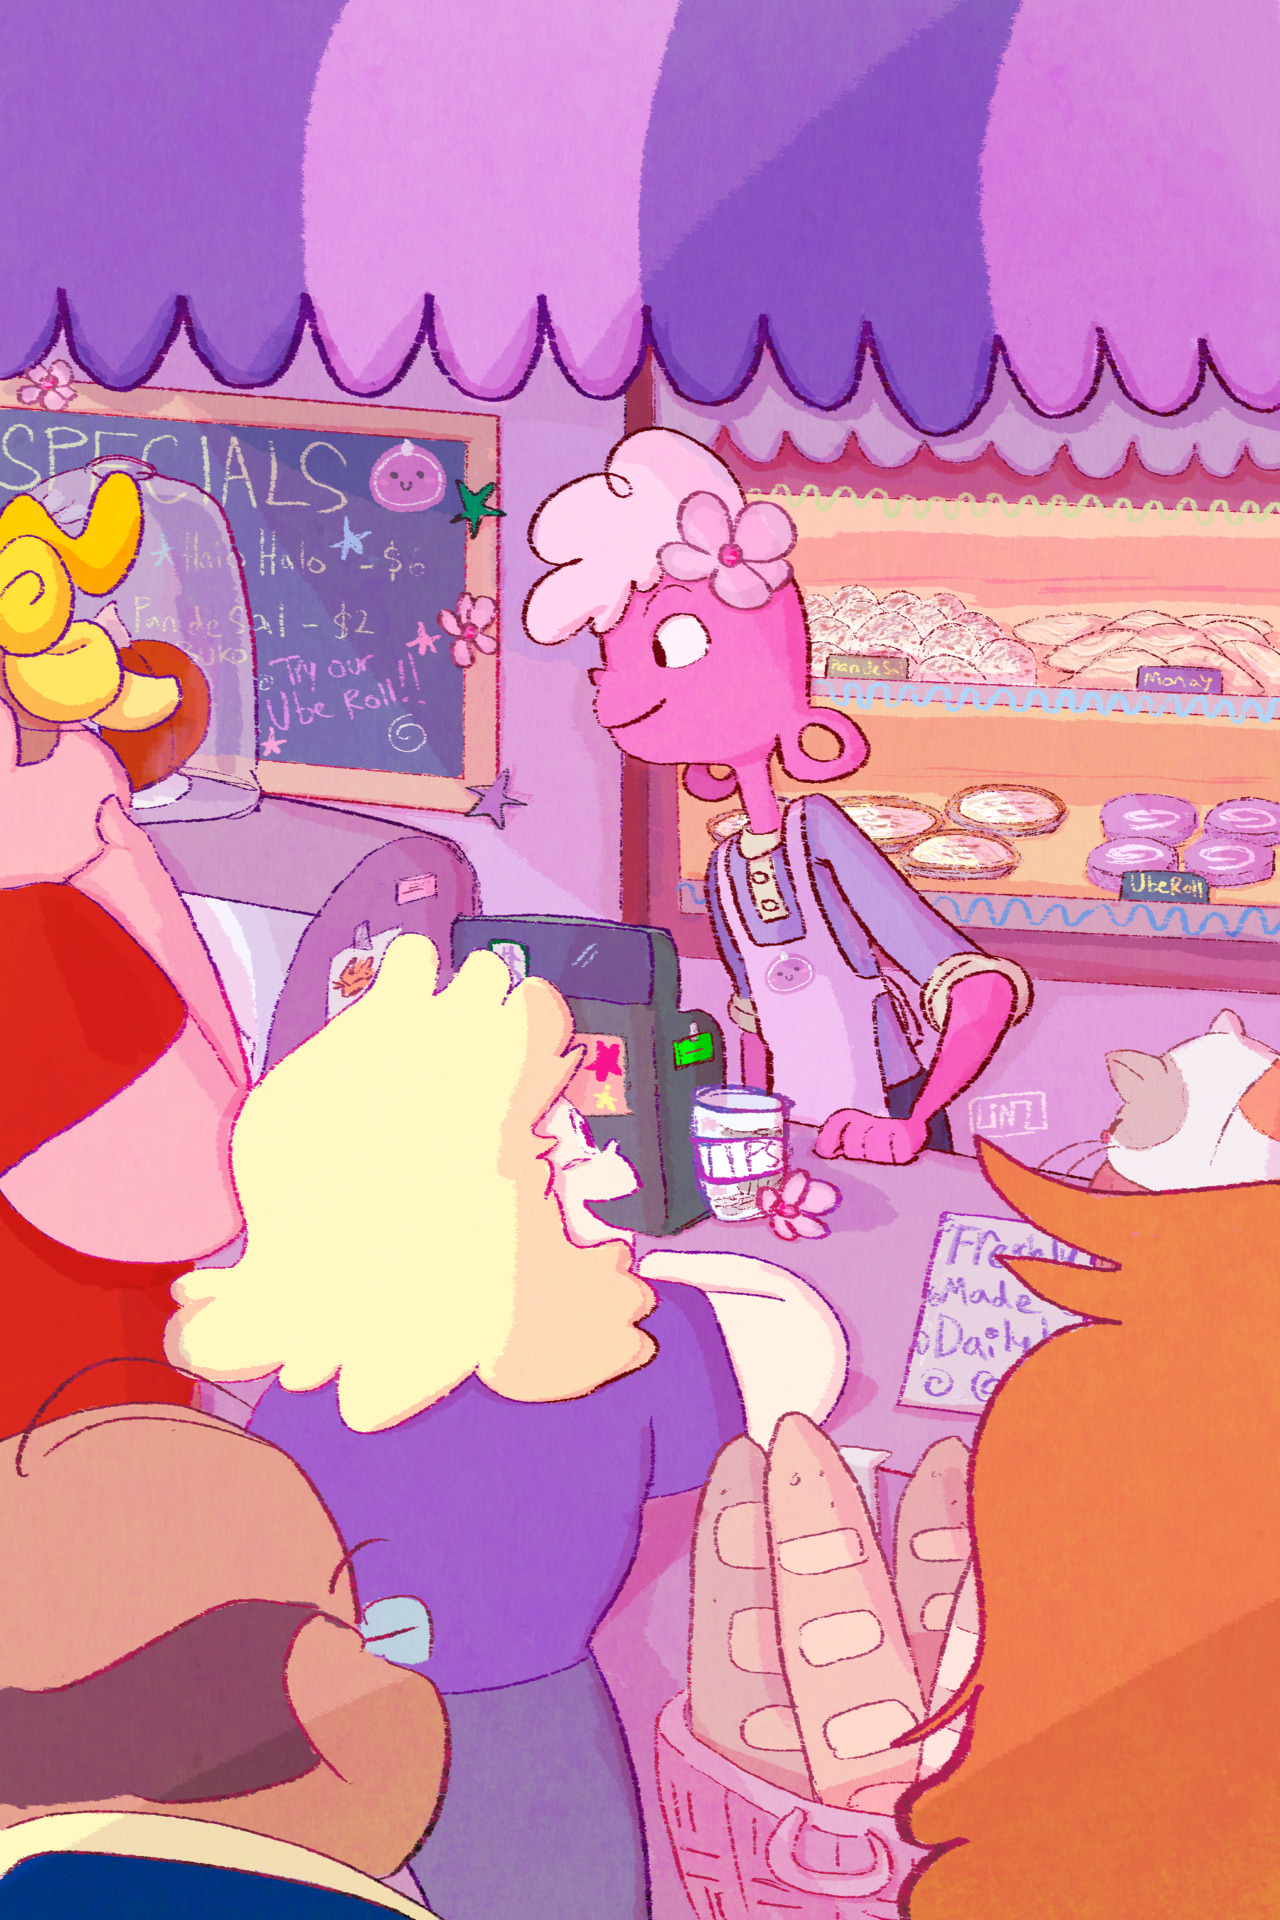 Back in 2017, I was part of a Steven Universe zine project…that sadly got cancelled (at least I think so. It’s been a year since the organizer has said anything at all) so I think it’s fair game to...